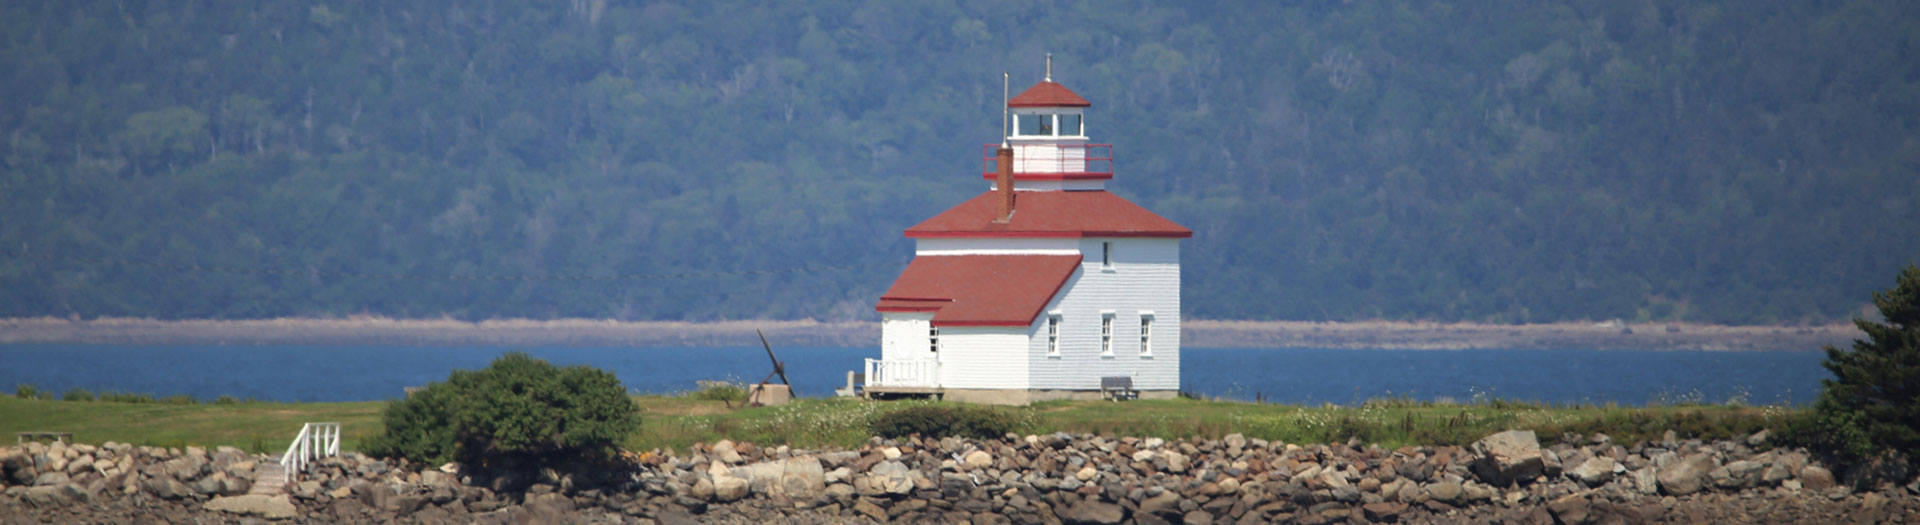 Gilberts Cove Lighthouse